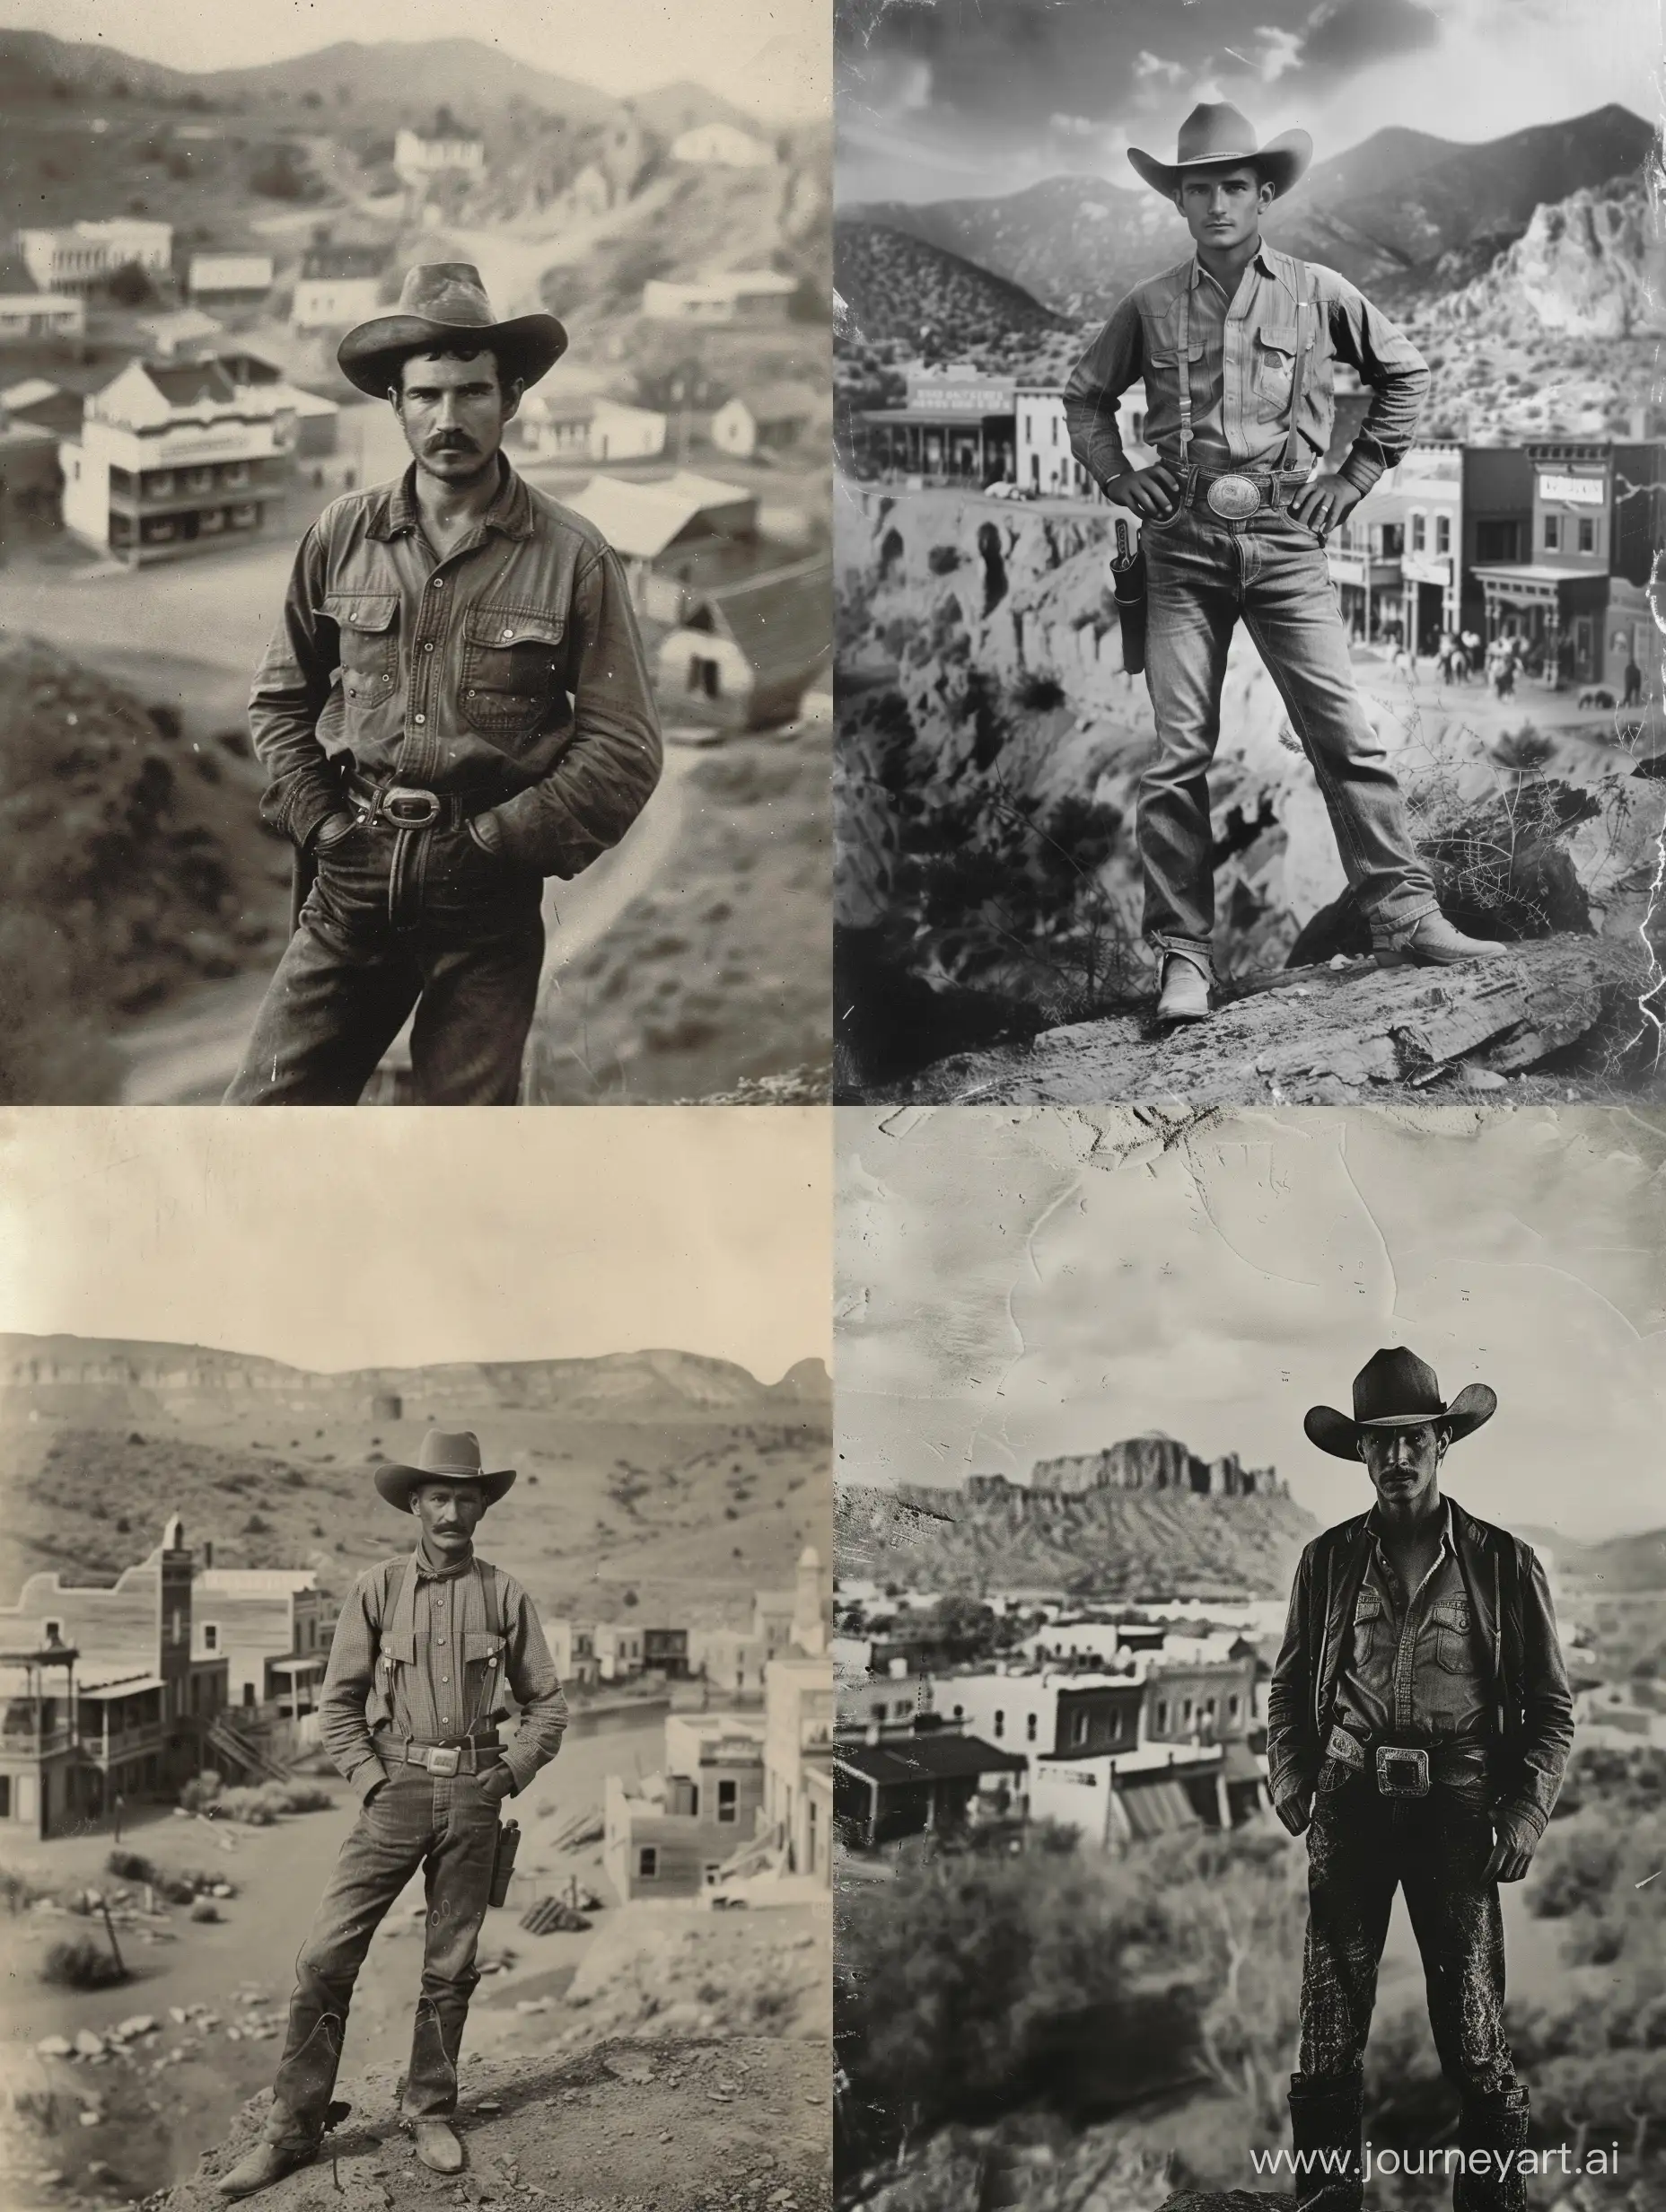 Wild-West-Cowboy-Posing-in-Front-of-Town-Vintage-Black-and-White-Photograph